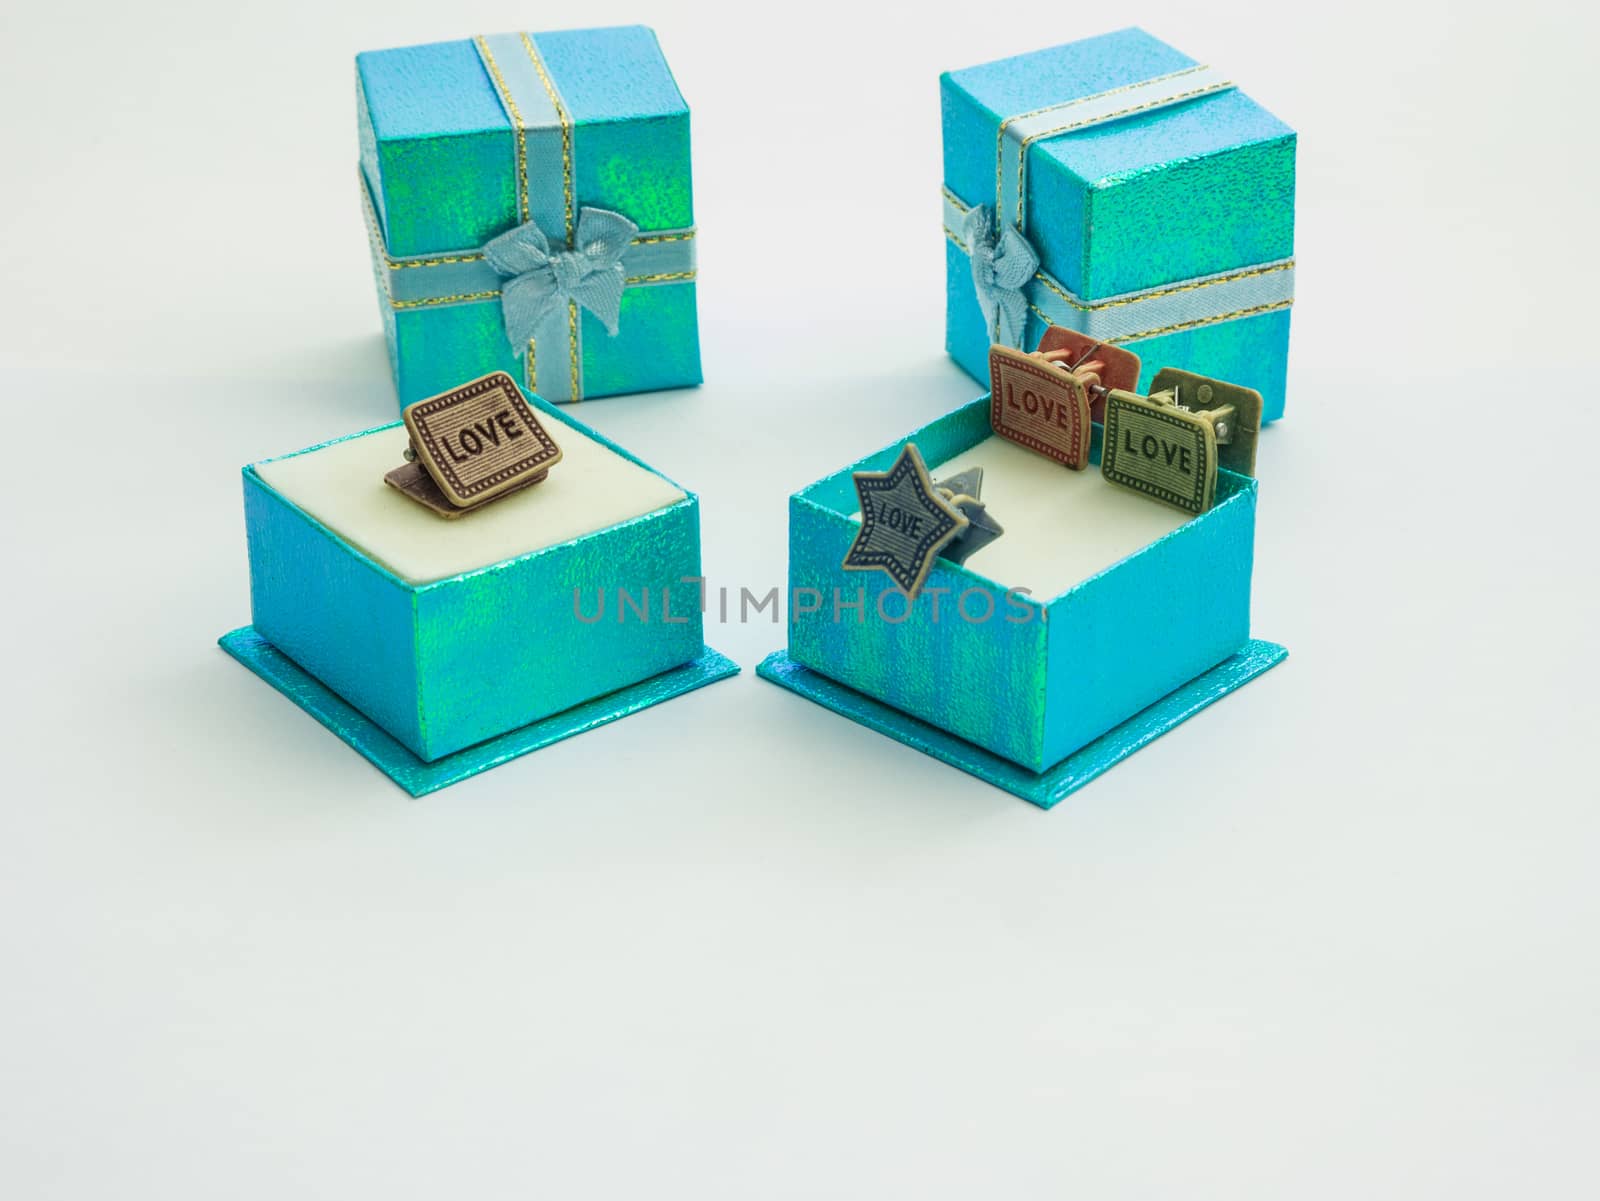 Small gift boxes is beautiful colors and cute paper clips.